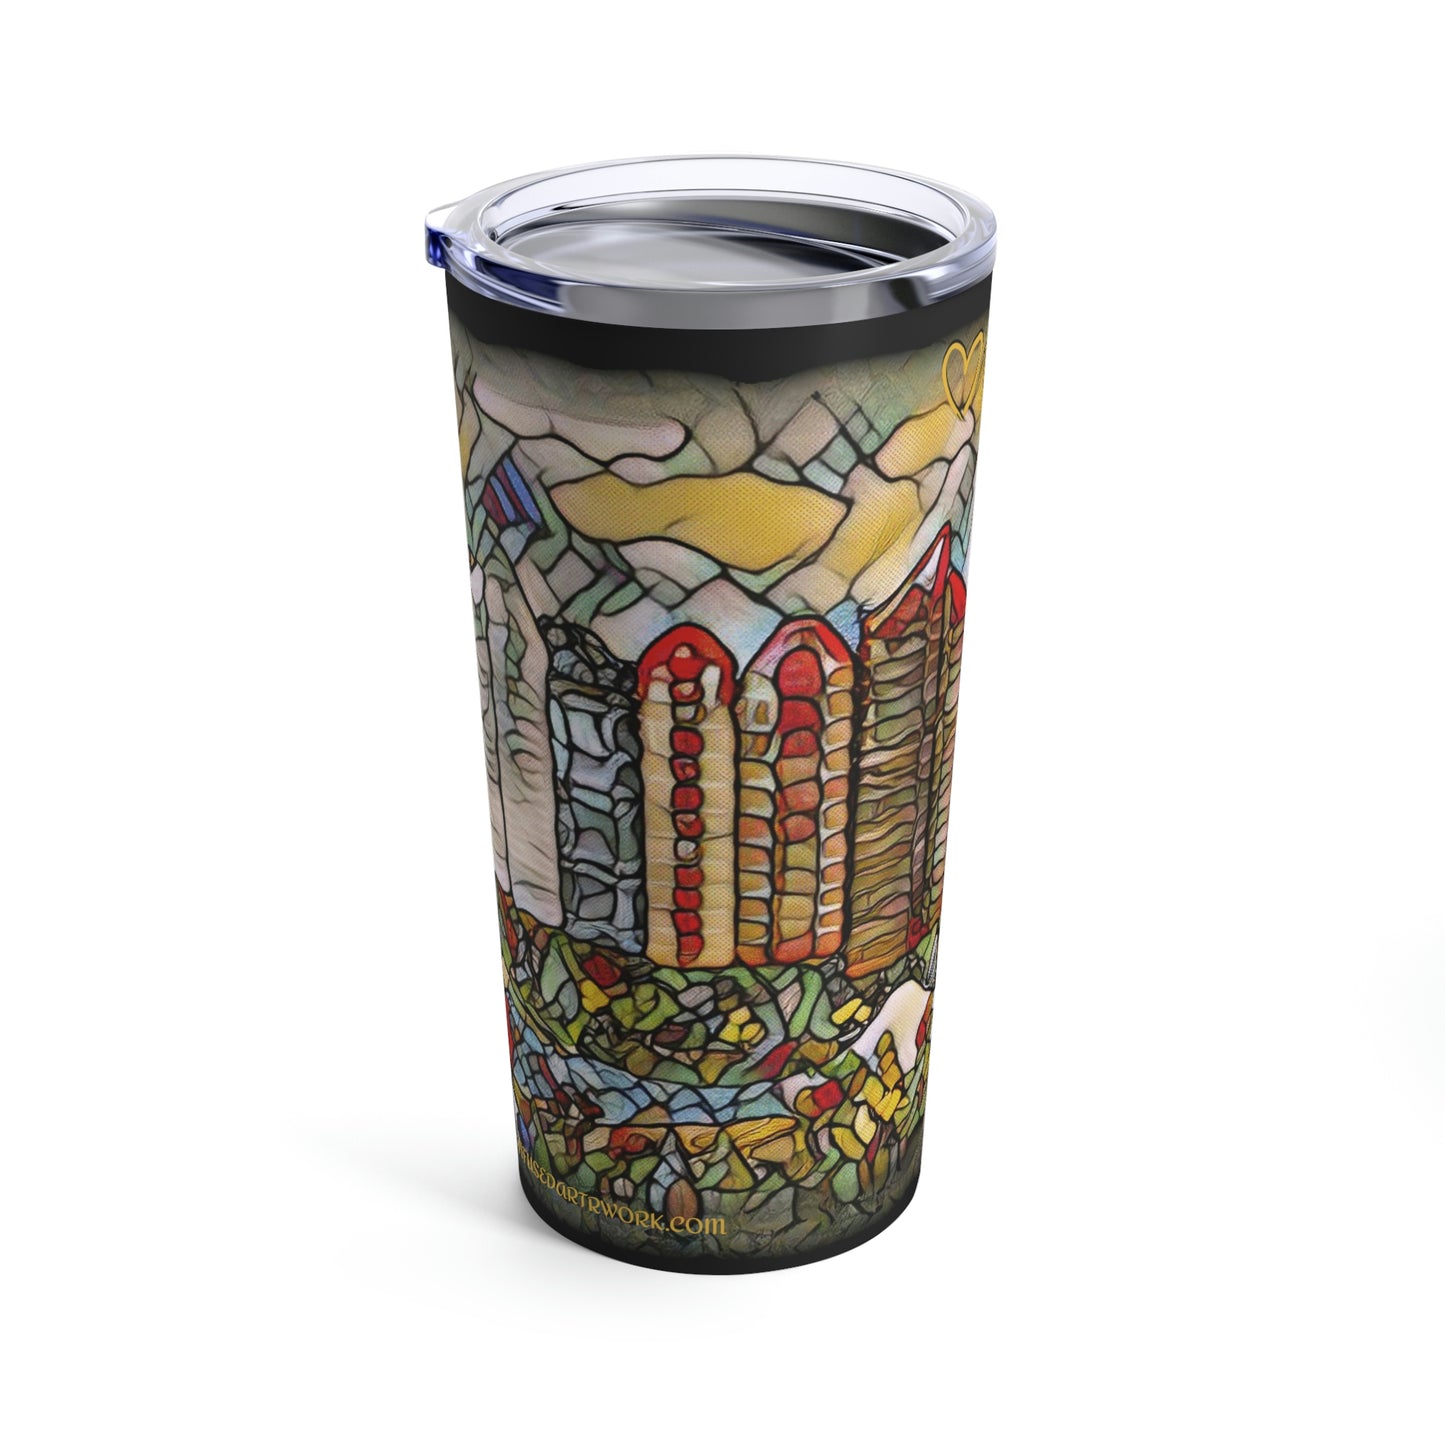 YYC LOVE to GO! - Calgary Cityscape 20oz Stainless Steel Travel Tumbler